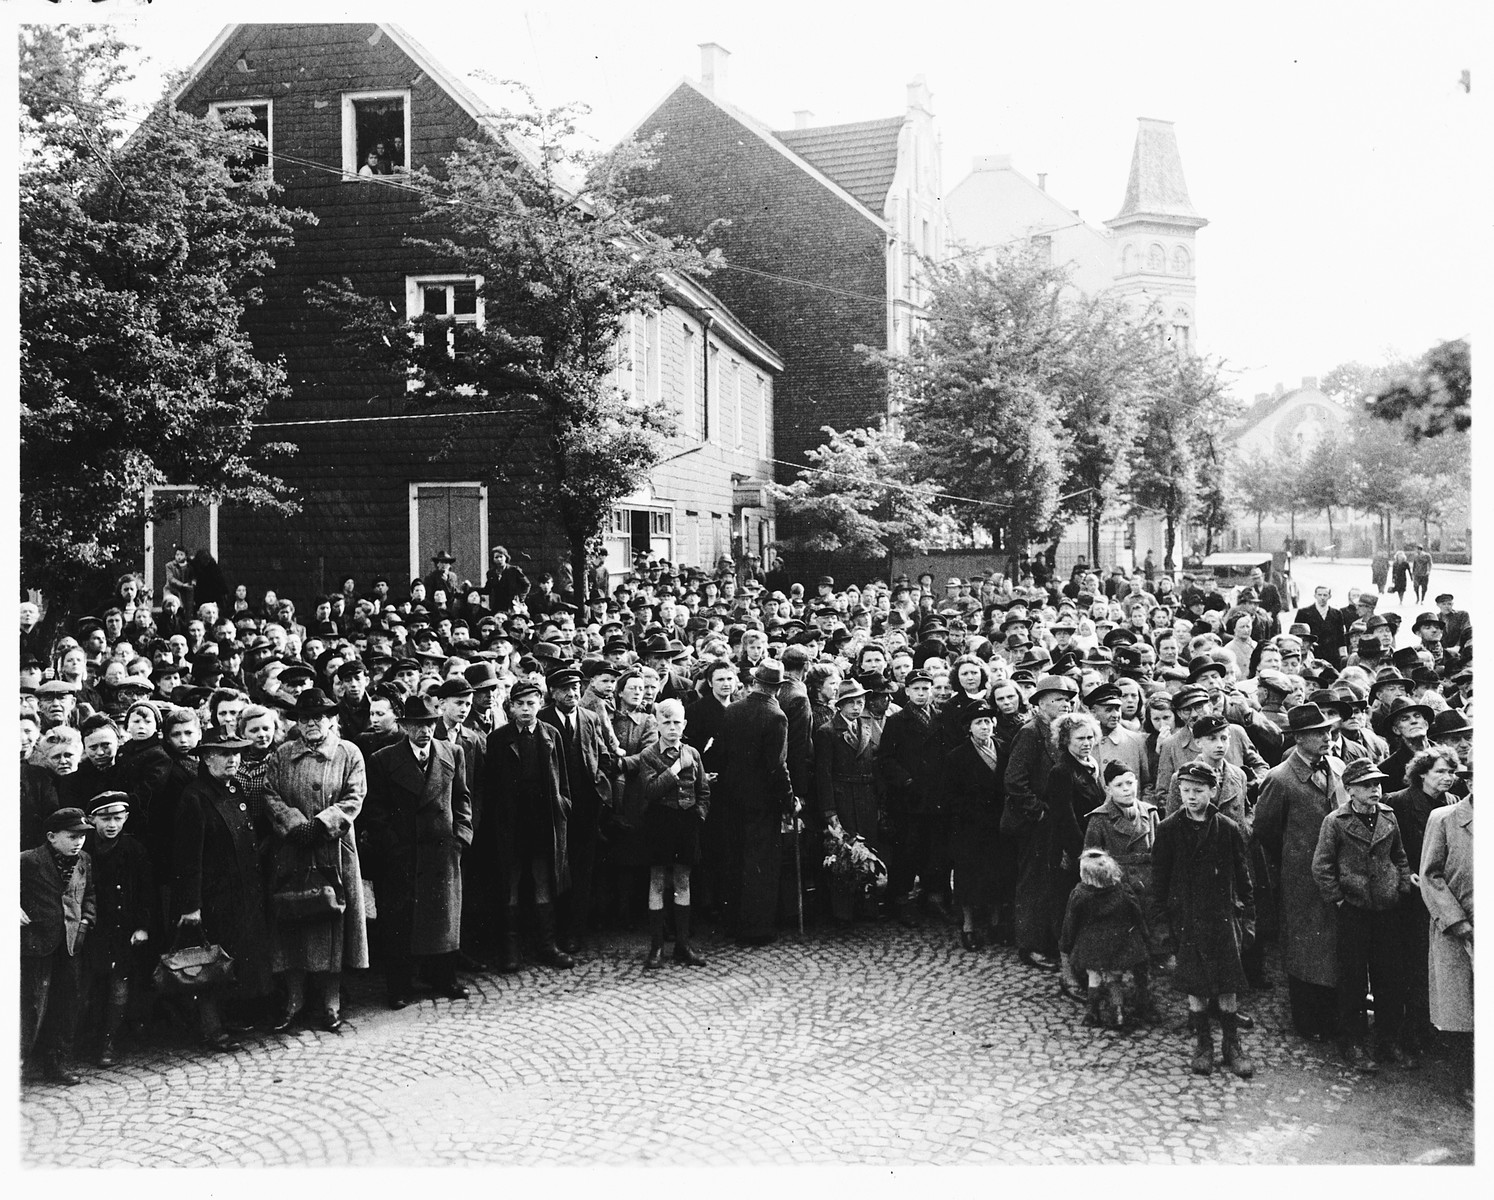 German civilians attend funeral services for the 71 political prisoners, exhumed from a mass grave near Solingen-Ohligs, reburied in front of the city hall.  

The victims, most of whom were taken from Luettringhausen prison, were shot and buried by the Gestapo following orders to eliminate all Reich enemies just before the end of the war.